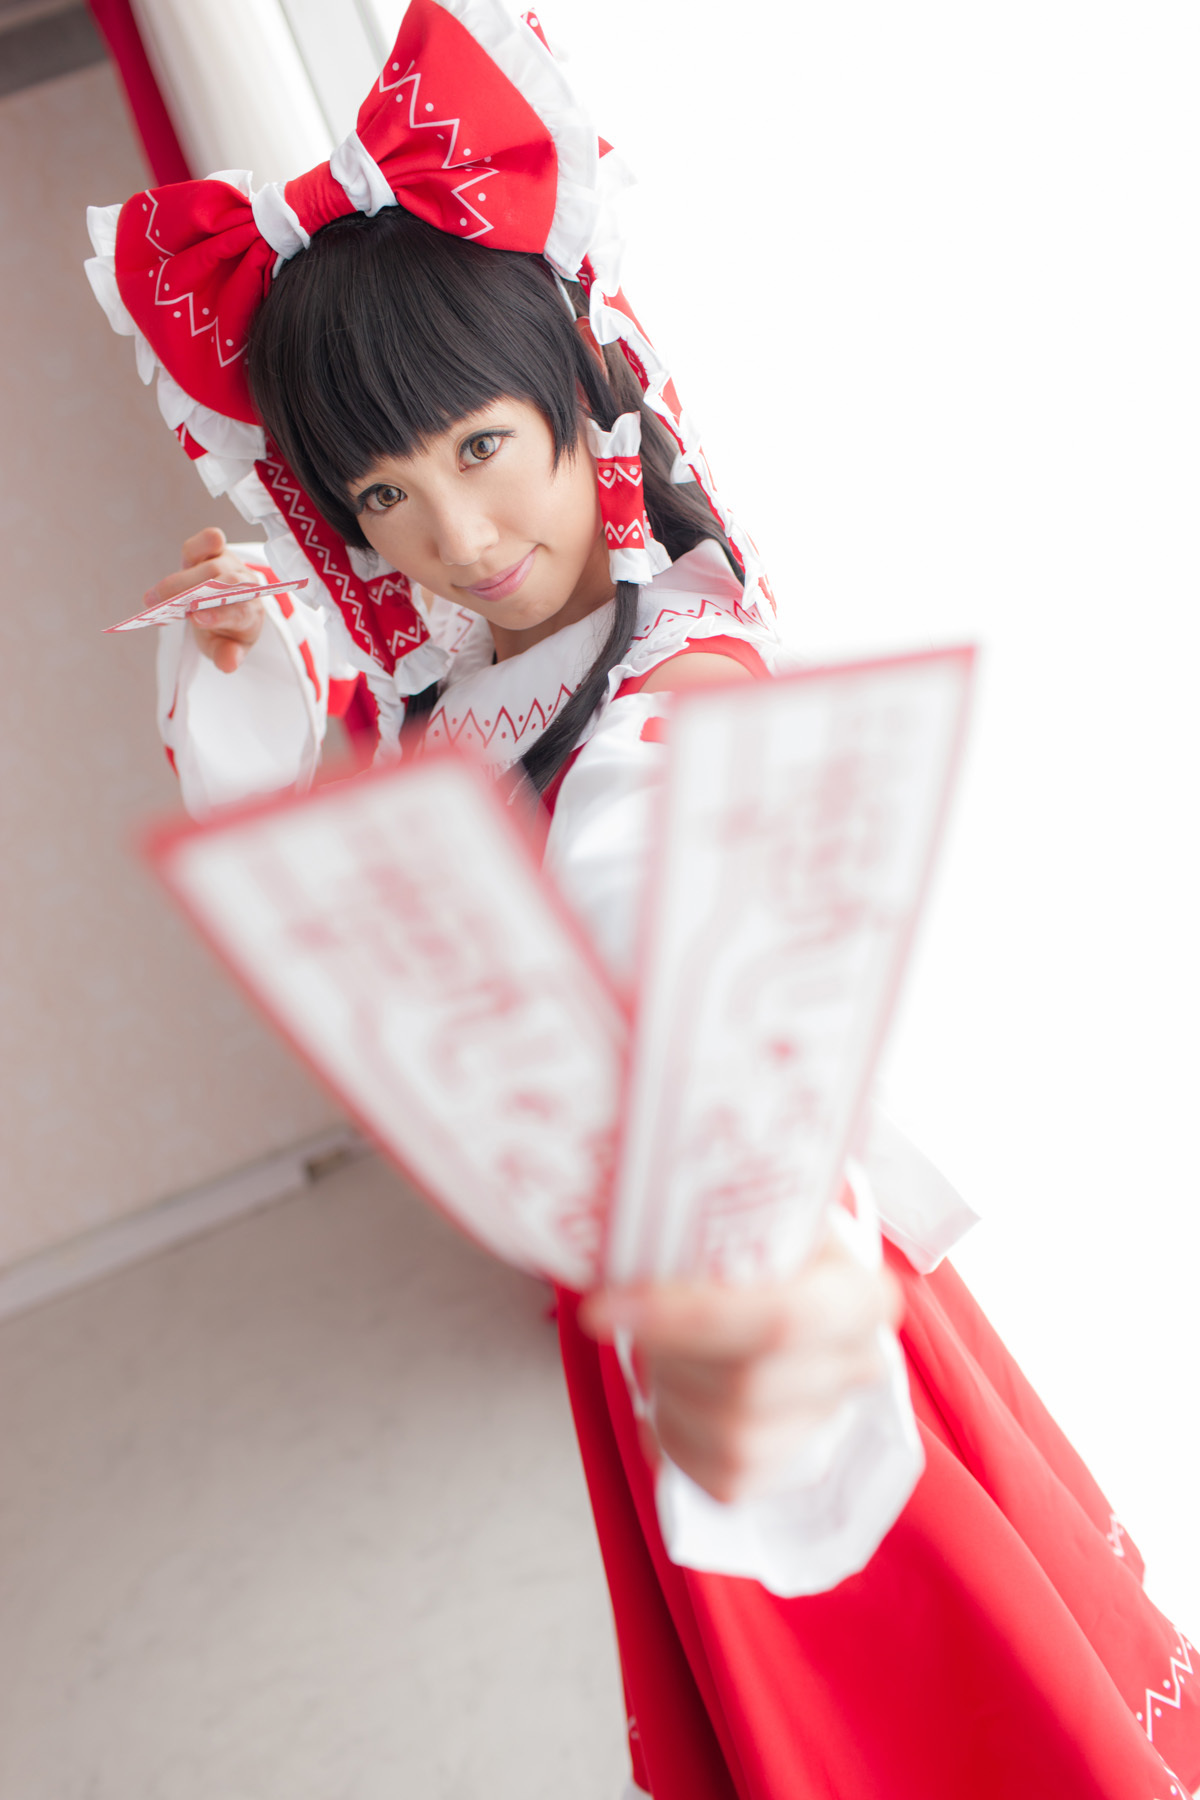 [Cosplay] 2013.12.03 Touhou Project cosplay